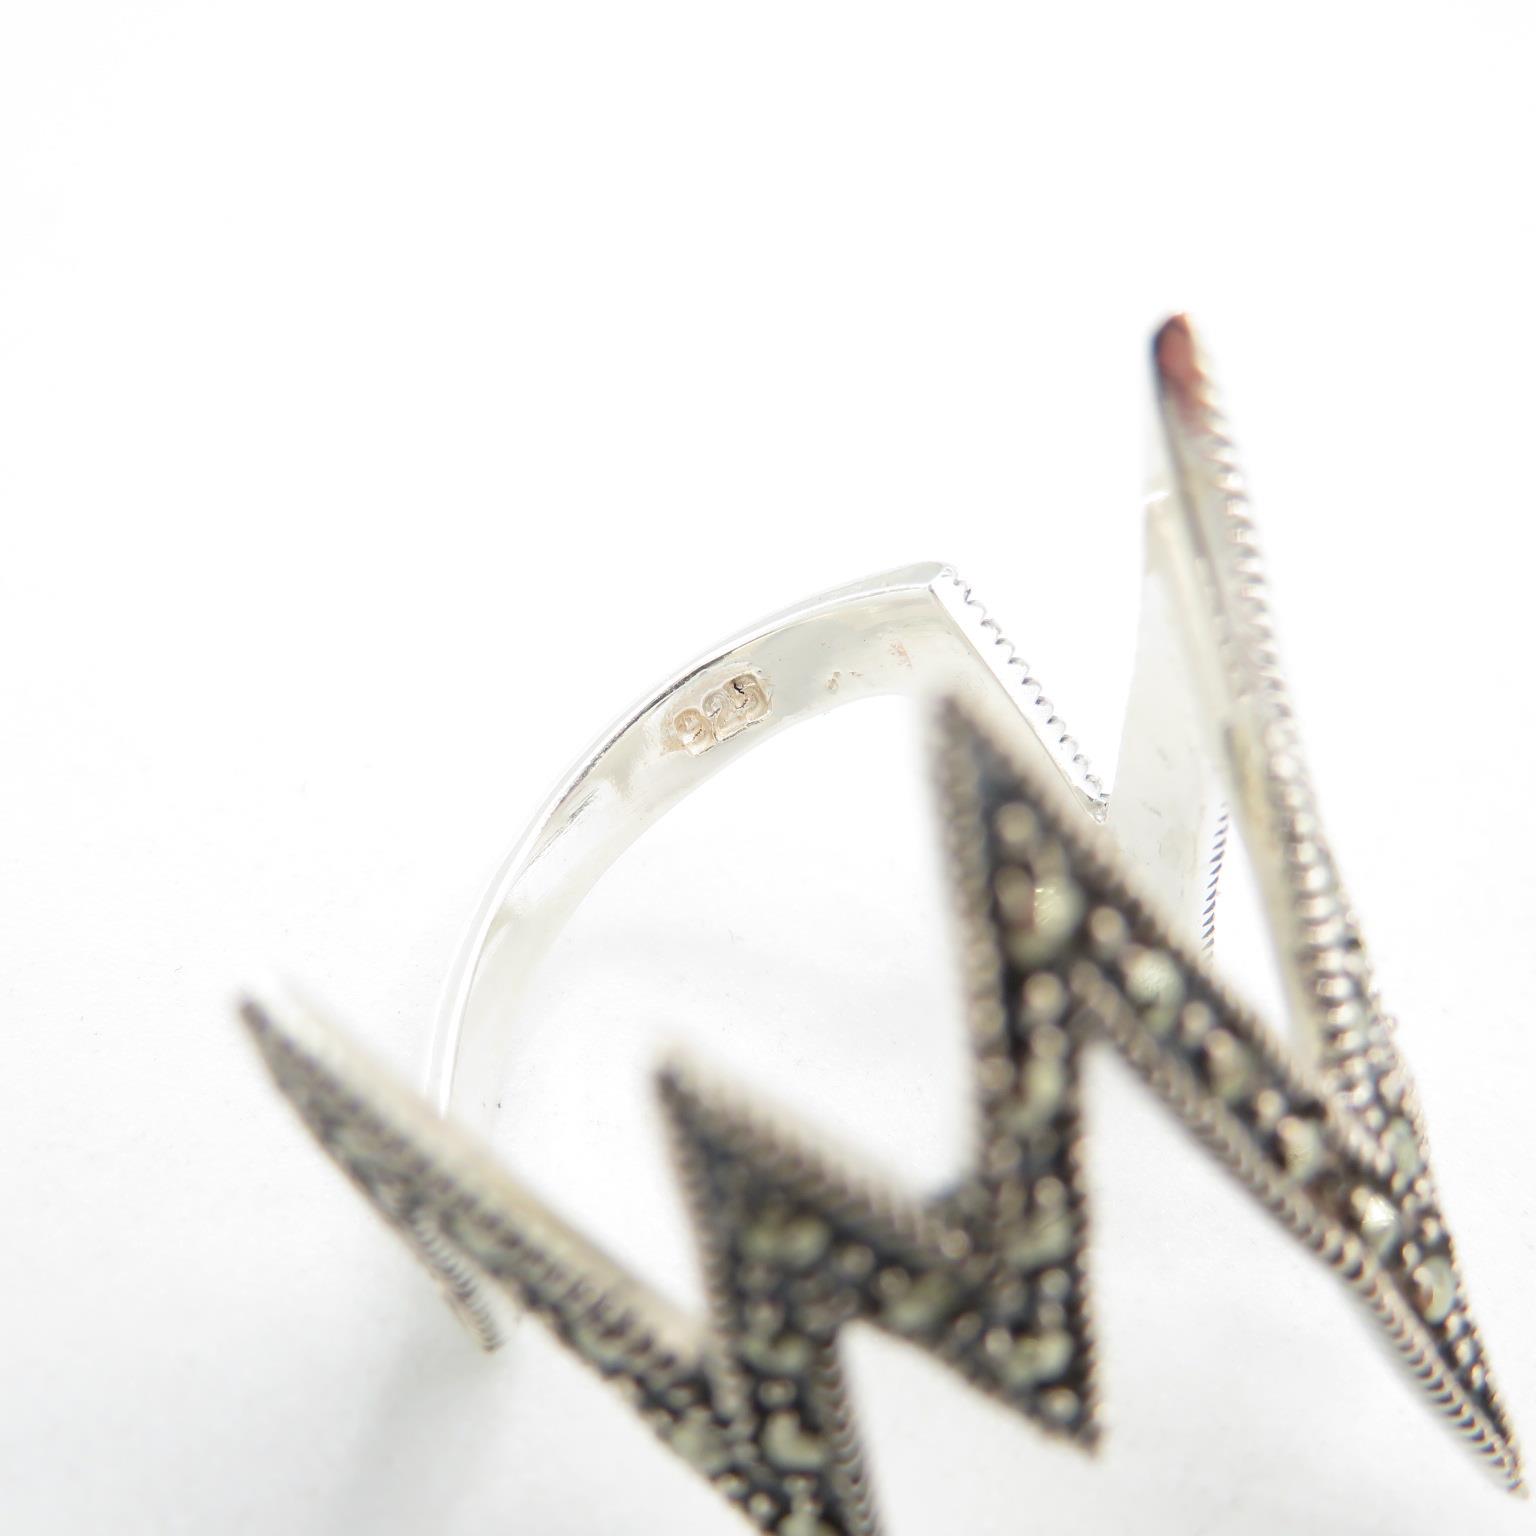 HM 925 Sterling Silver Zig Zag ring (5.1g) In excellent condition - Image 6 of 6